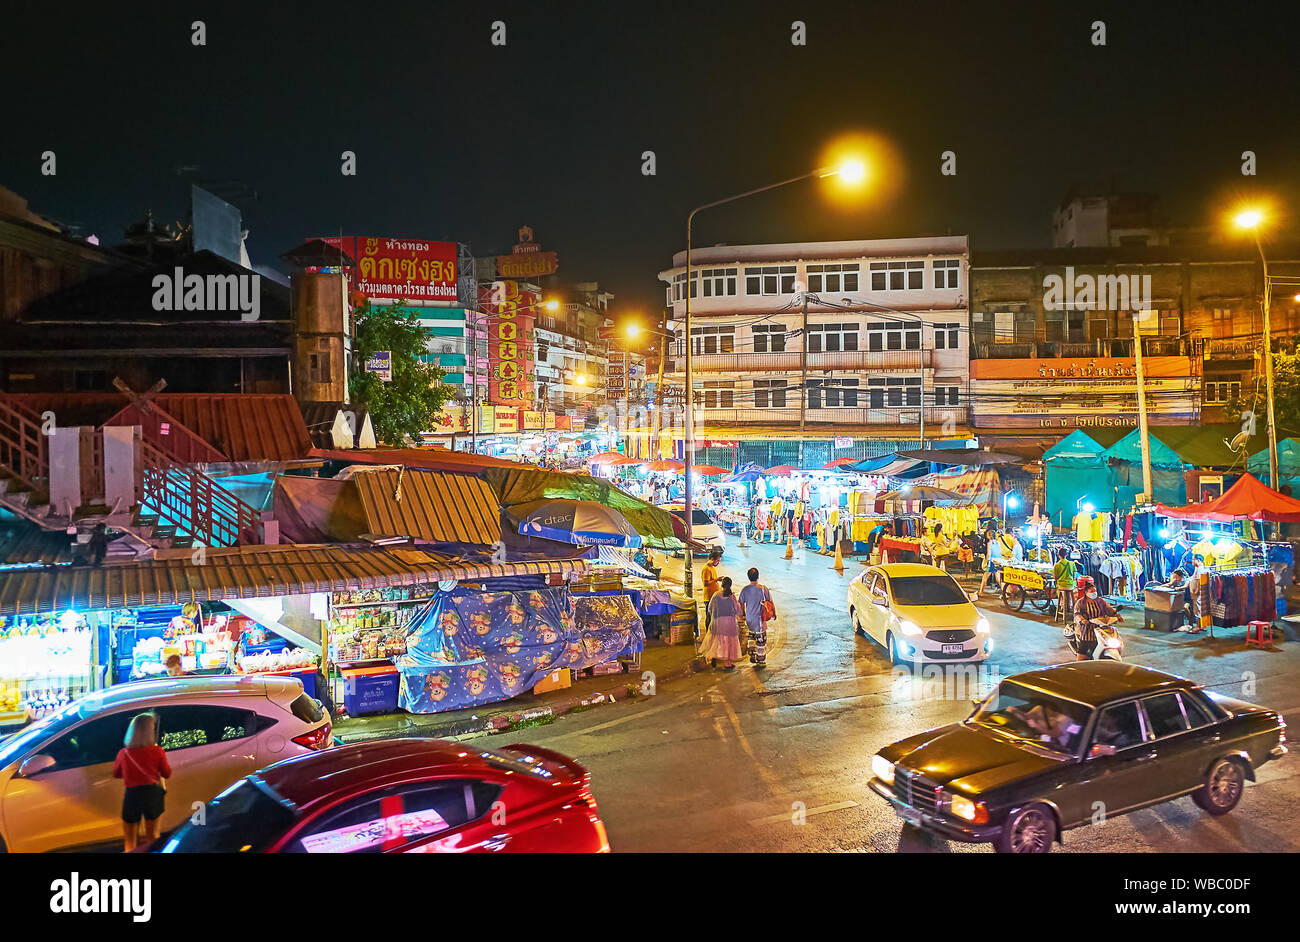 CHIANG MAI, THAILAND - MAY 2, 2019: The busy Praisanee Road at the Warorot Night Market with its numerous illuminated stalls and street vendors, on Ma Stock Photo